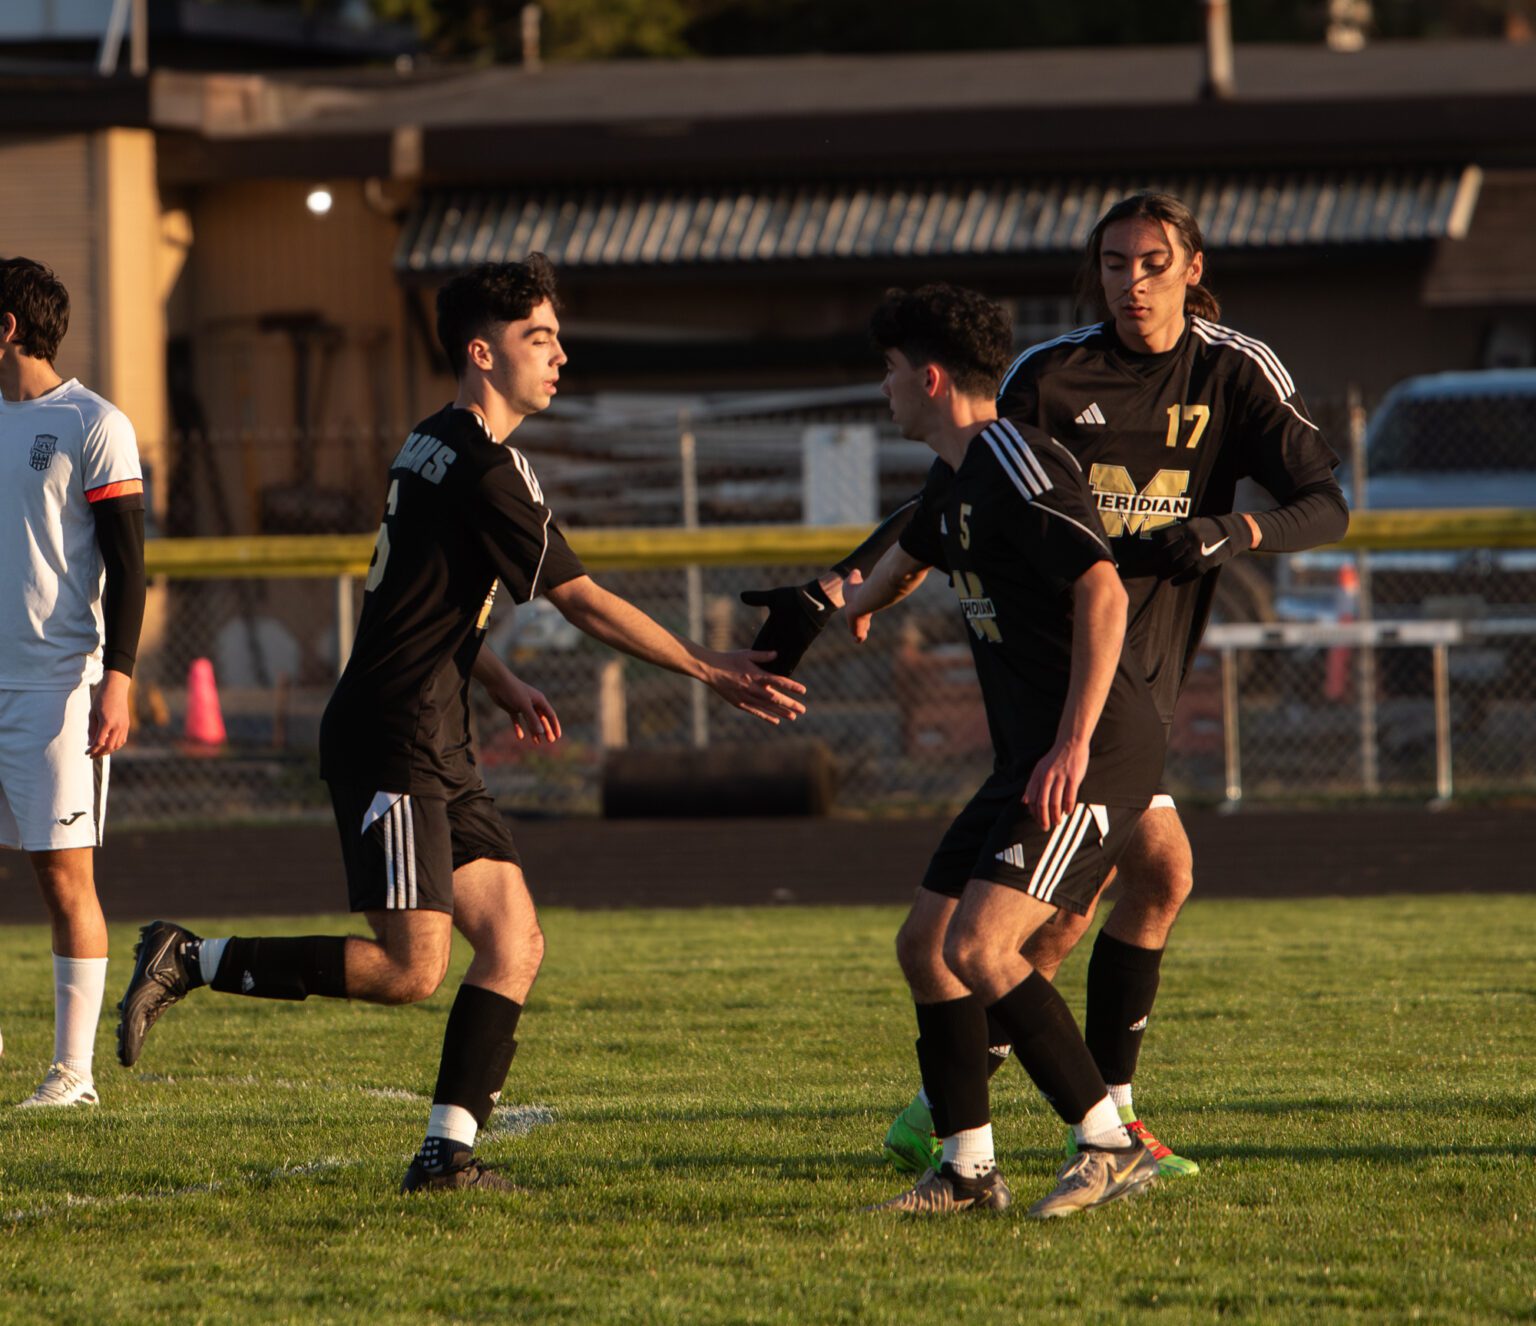 Meridian junior defender Kellen Todd gets high-fives Thursday, April 3 from teammates after scoring the first goal of the game against Blaine. The Trojans scored once in the first half, second half and stoppage time to beat the Borderites 3-0.